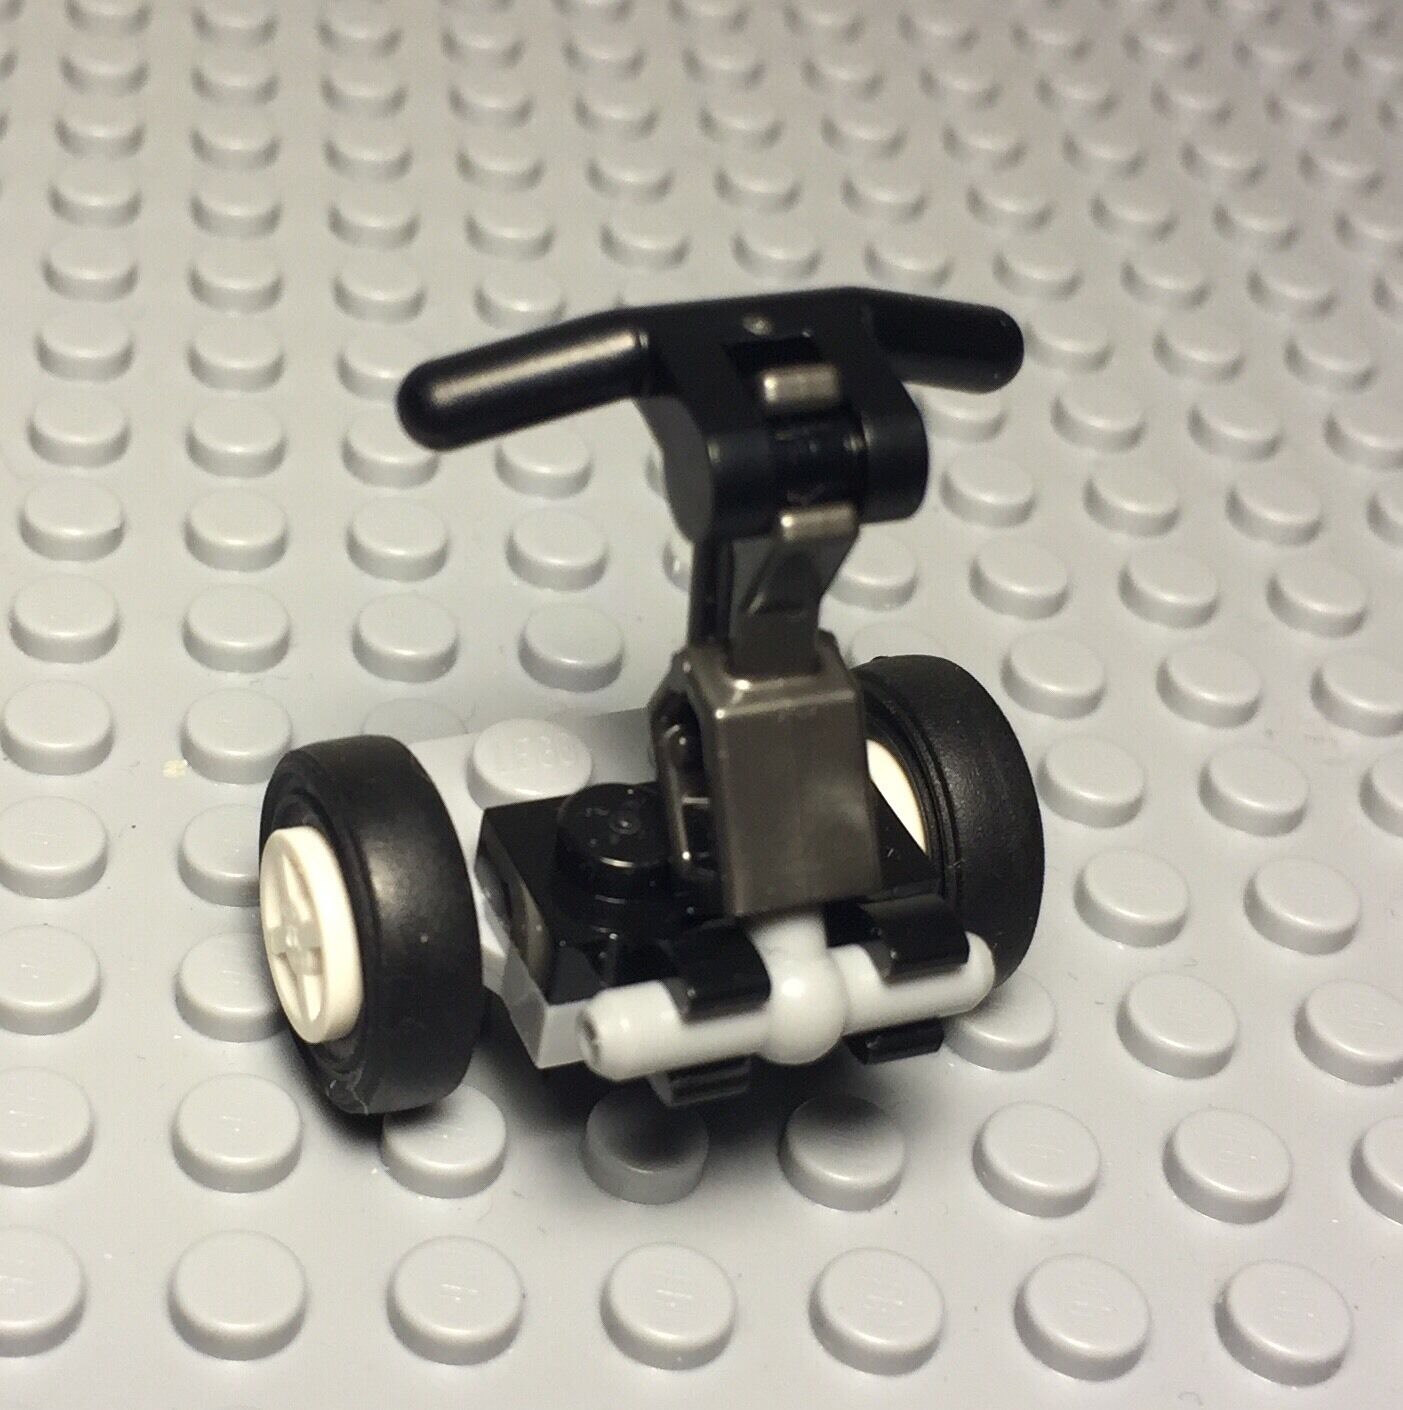 Lego City Town Mini Figures Scooter / Segway Roller / Utility Vehicle LEGO Does Not Apply